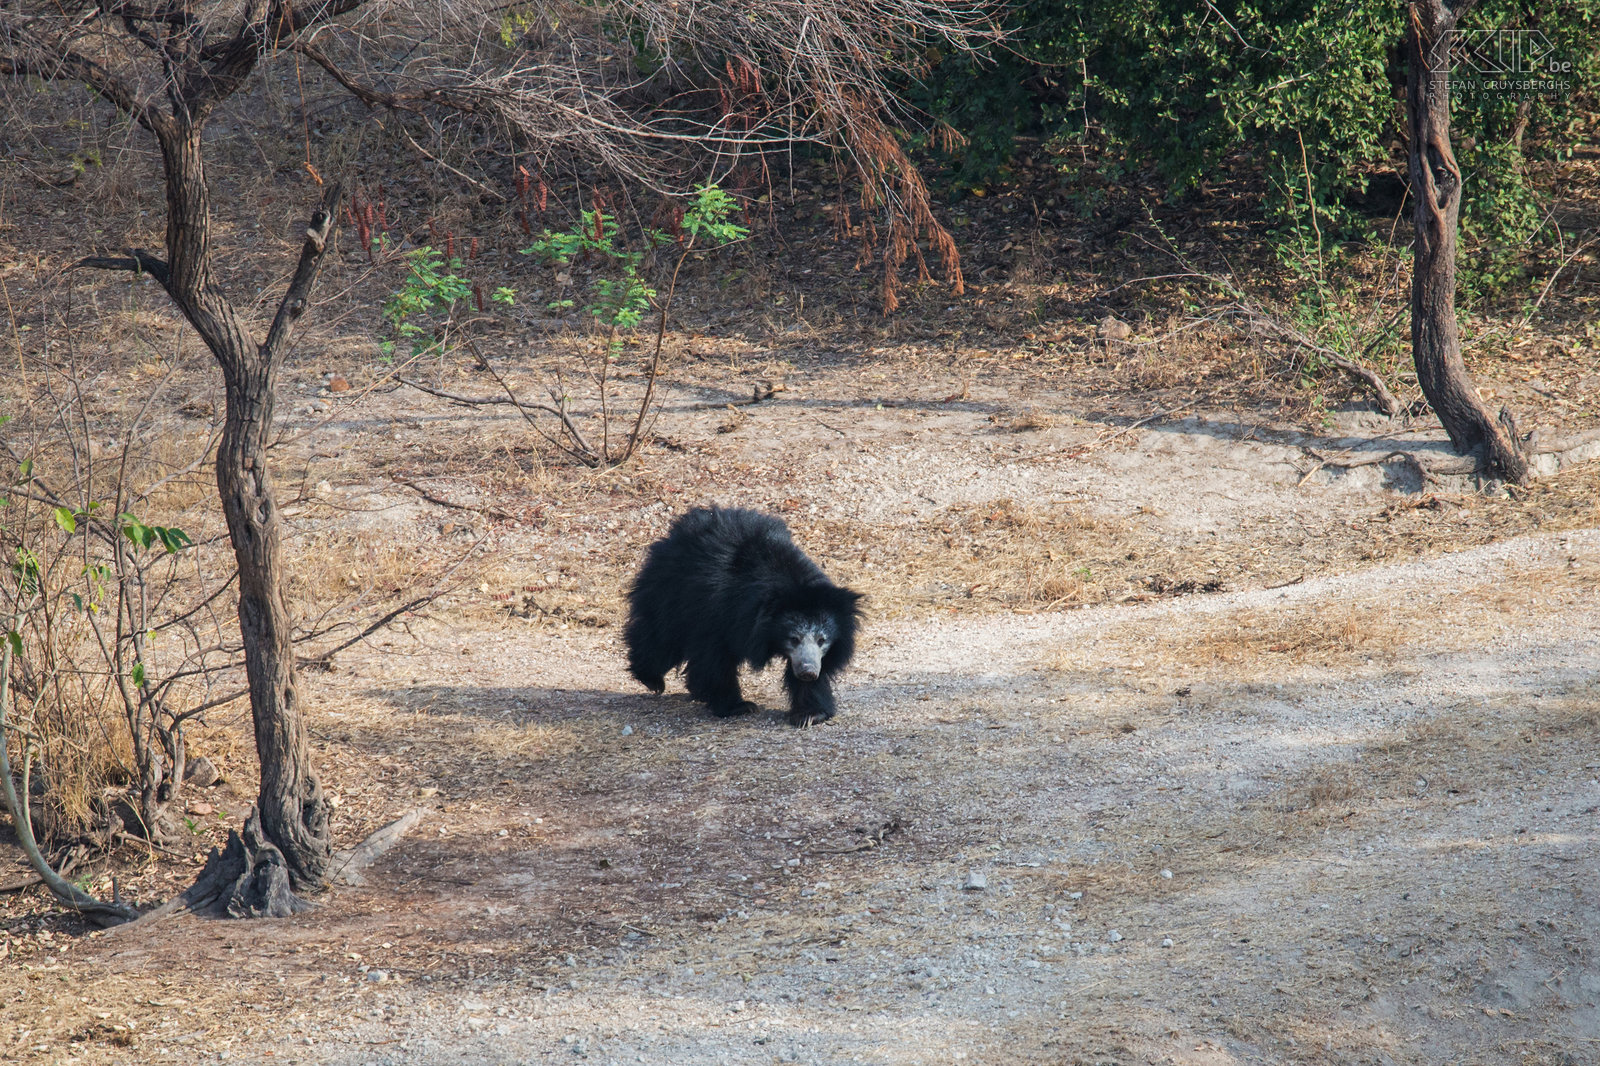 Daroji - Sloth bear A sloth bear (Melursus ursinus) is a nocturnal animal that is quite shy and nervous. They feed on termites, bee colonies and fruits. We went to the Daroji Bear Sanctuary near Hampi. We spotted a female sloth bear with two cubs and a male sloth bear.  Stefan Cruysberghs